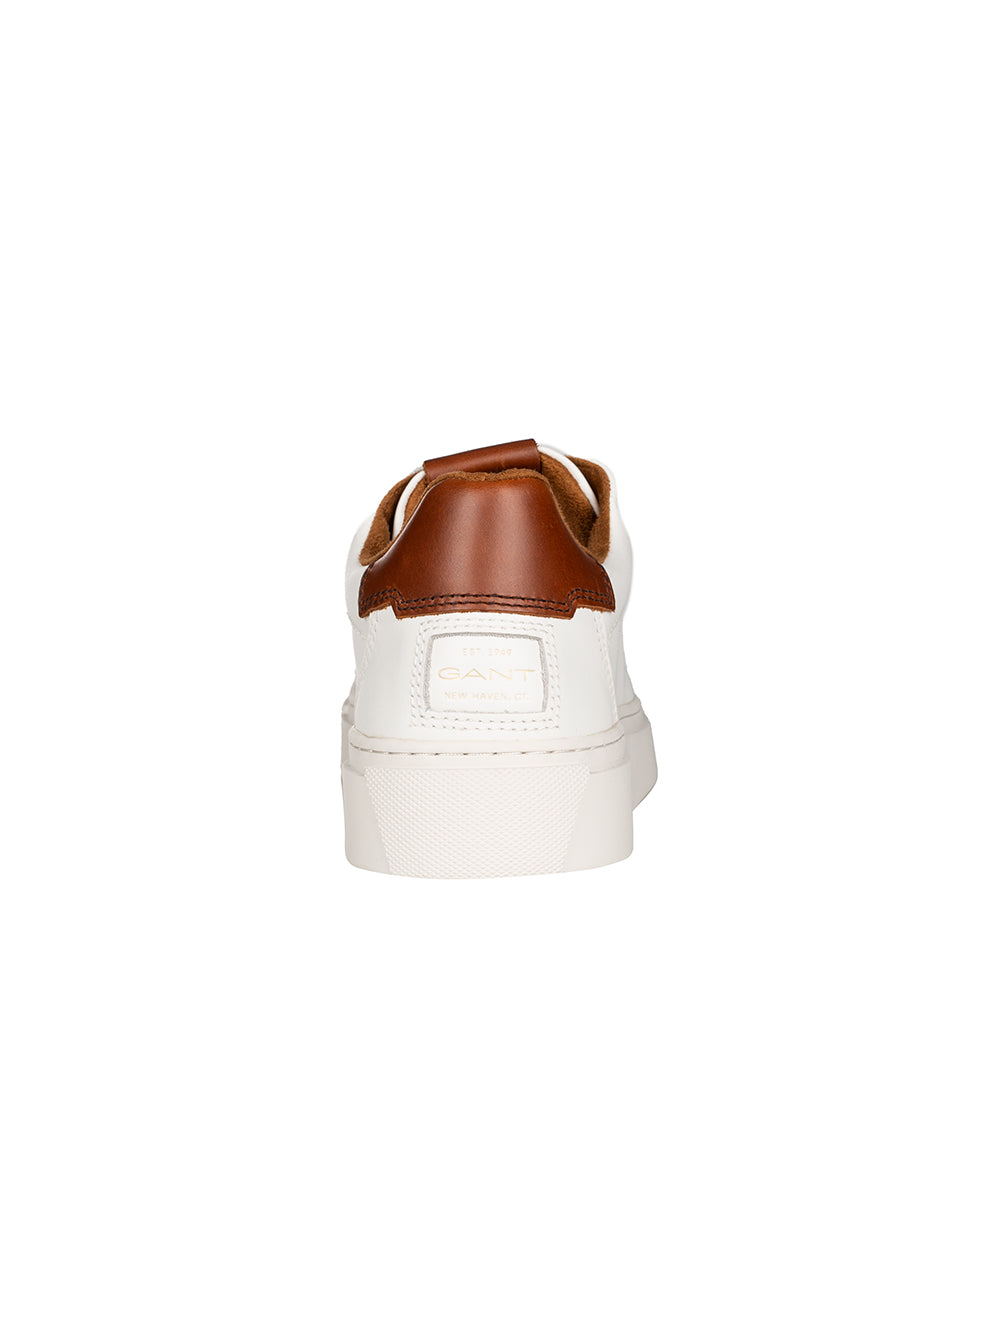 McJulien Leather Sneakers White Cognac